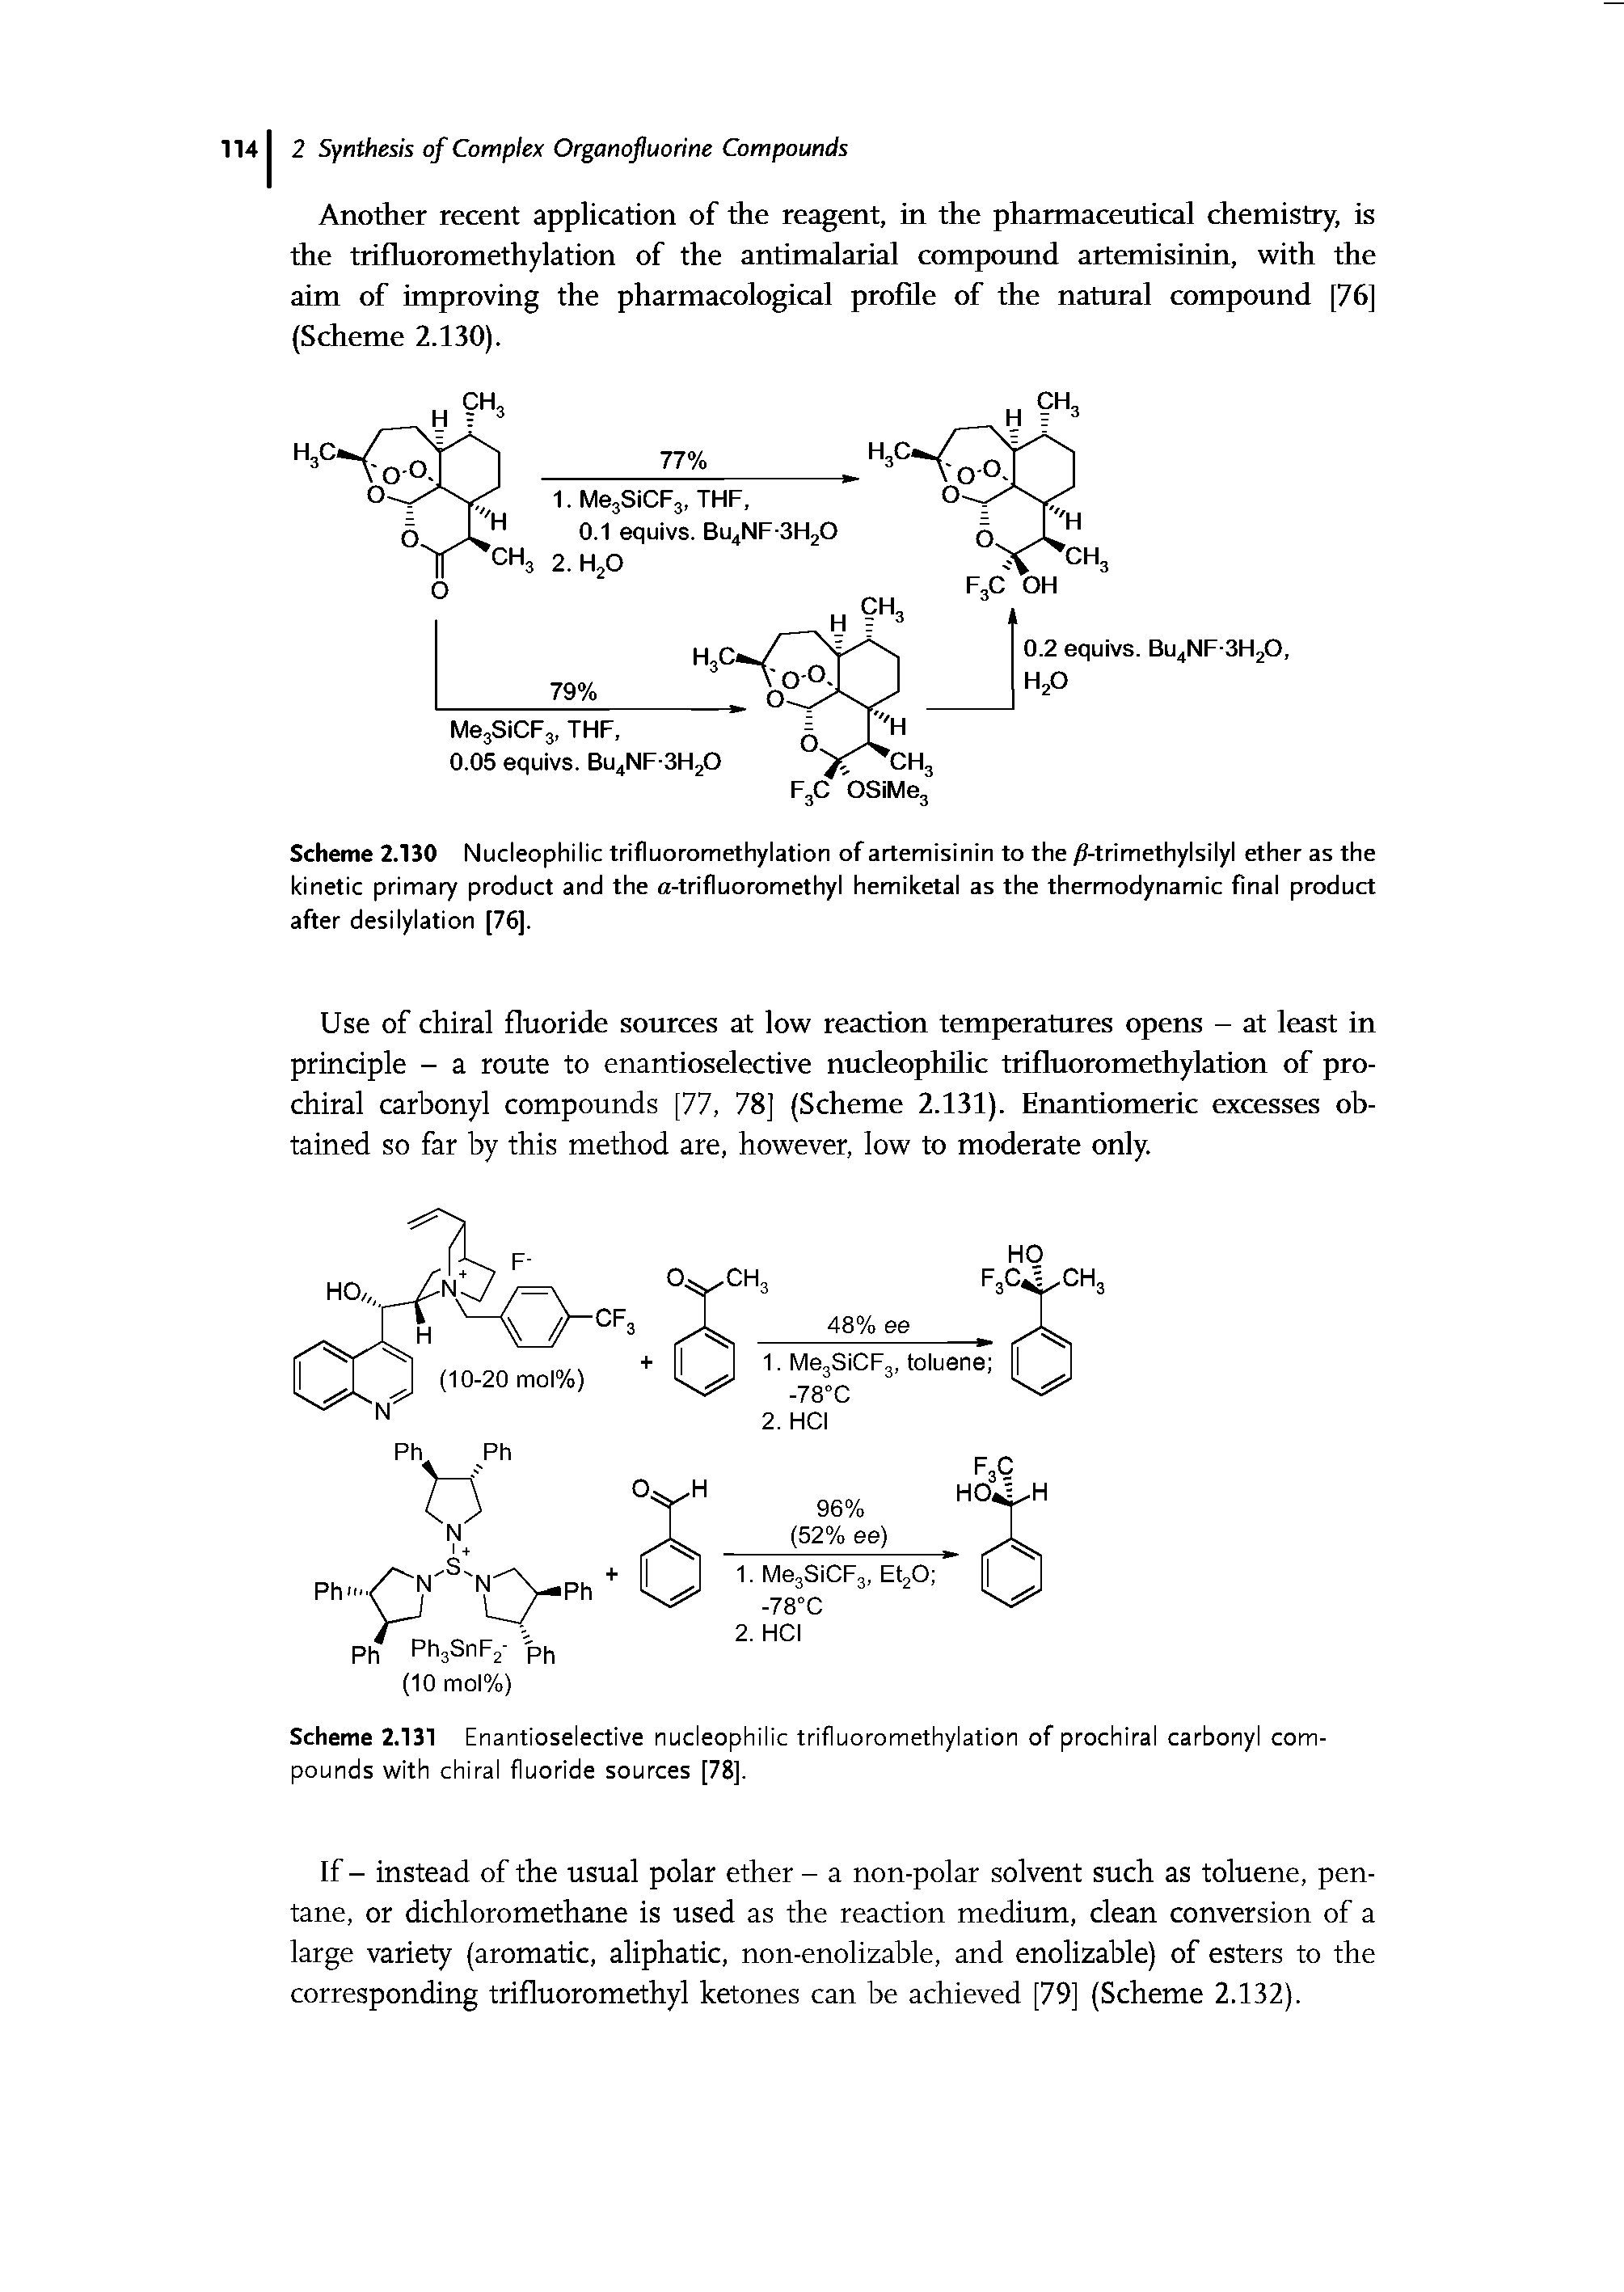 Scheme 2.131 Enantioselective nucleophilic trifluoromethylation of prochiral carbonyl compounds with chiral fluoride sources [78].